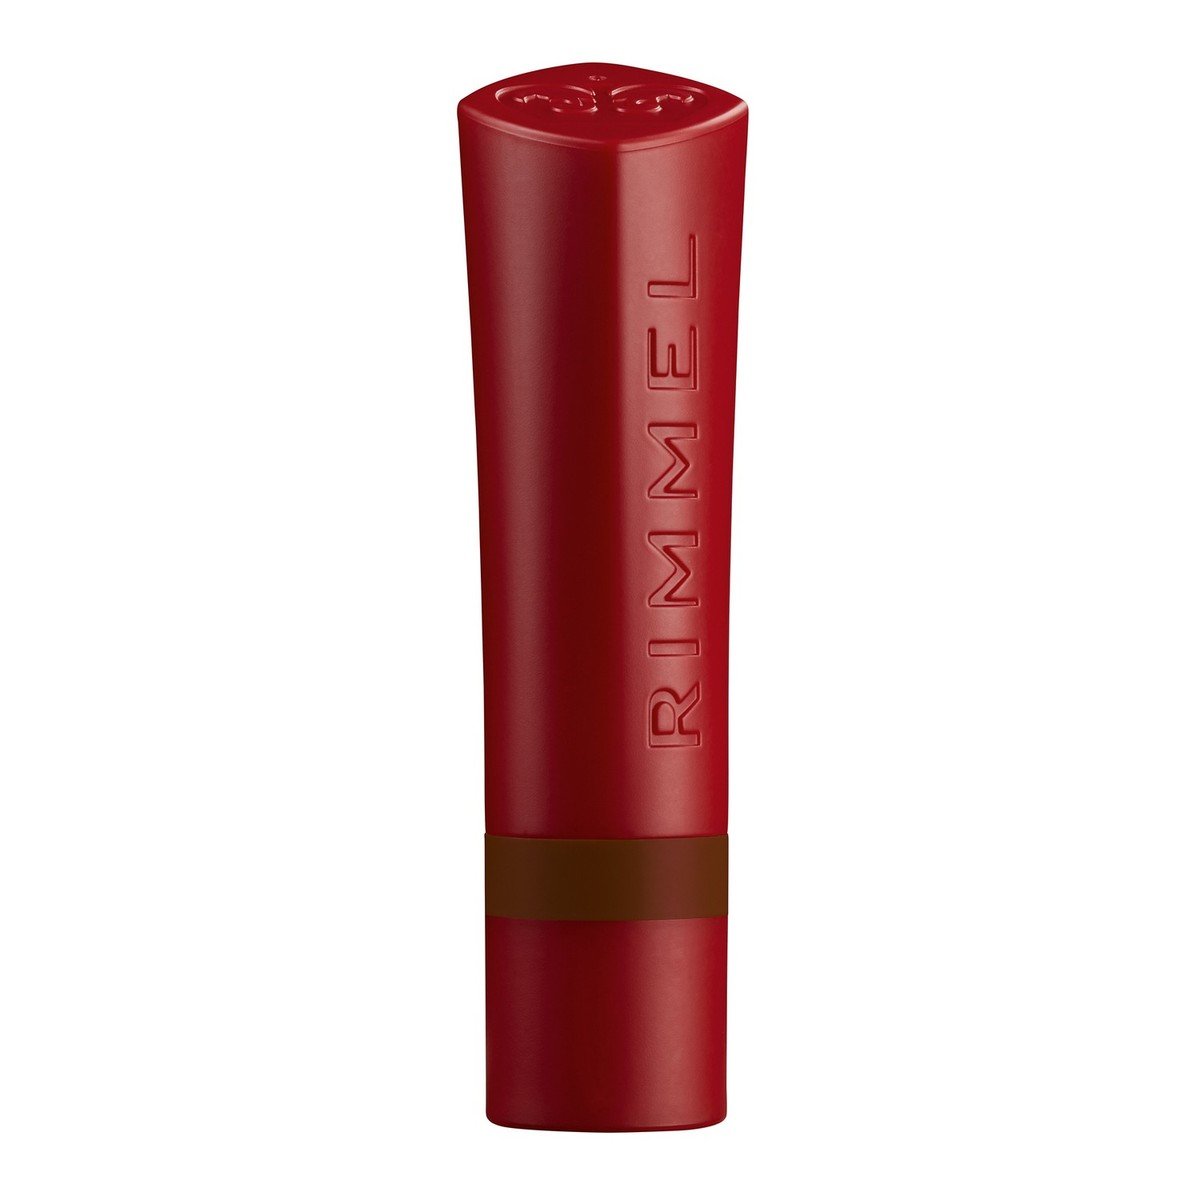 Rimmel London The Only 1 Matte Lipstick - Look Who's Talking 1pc